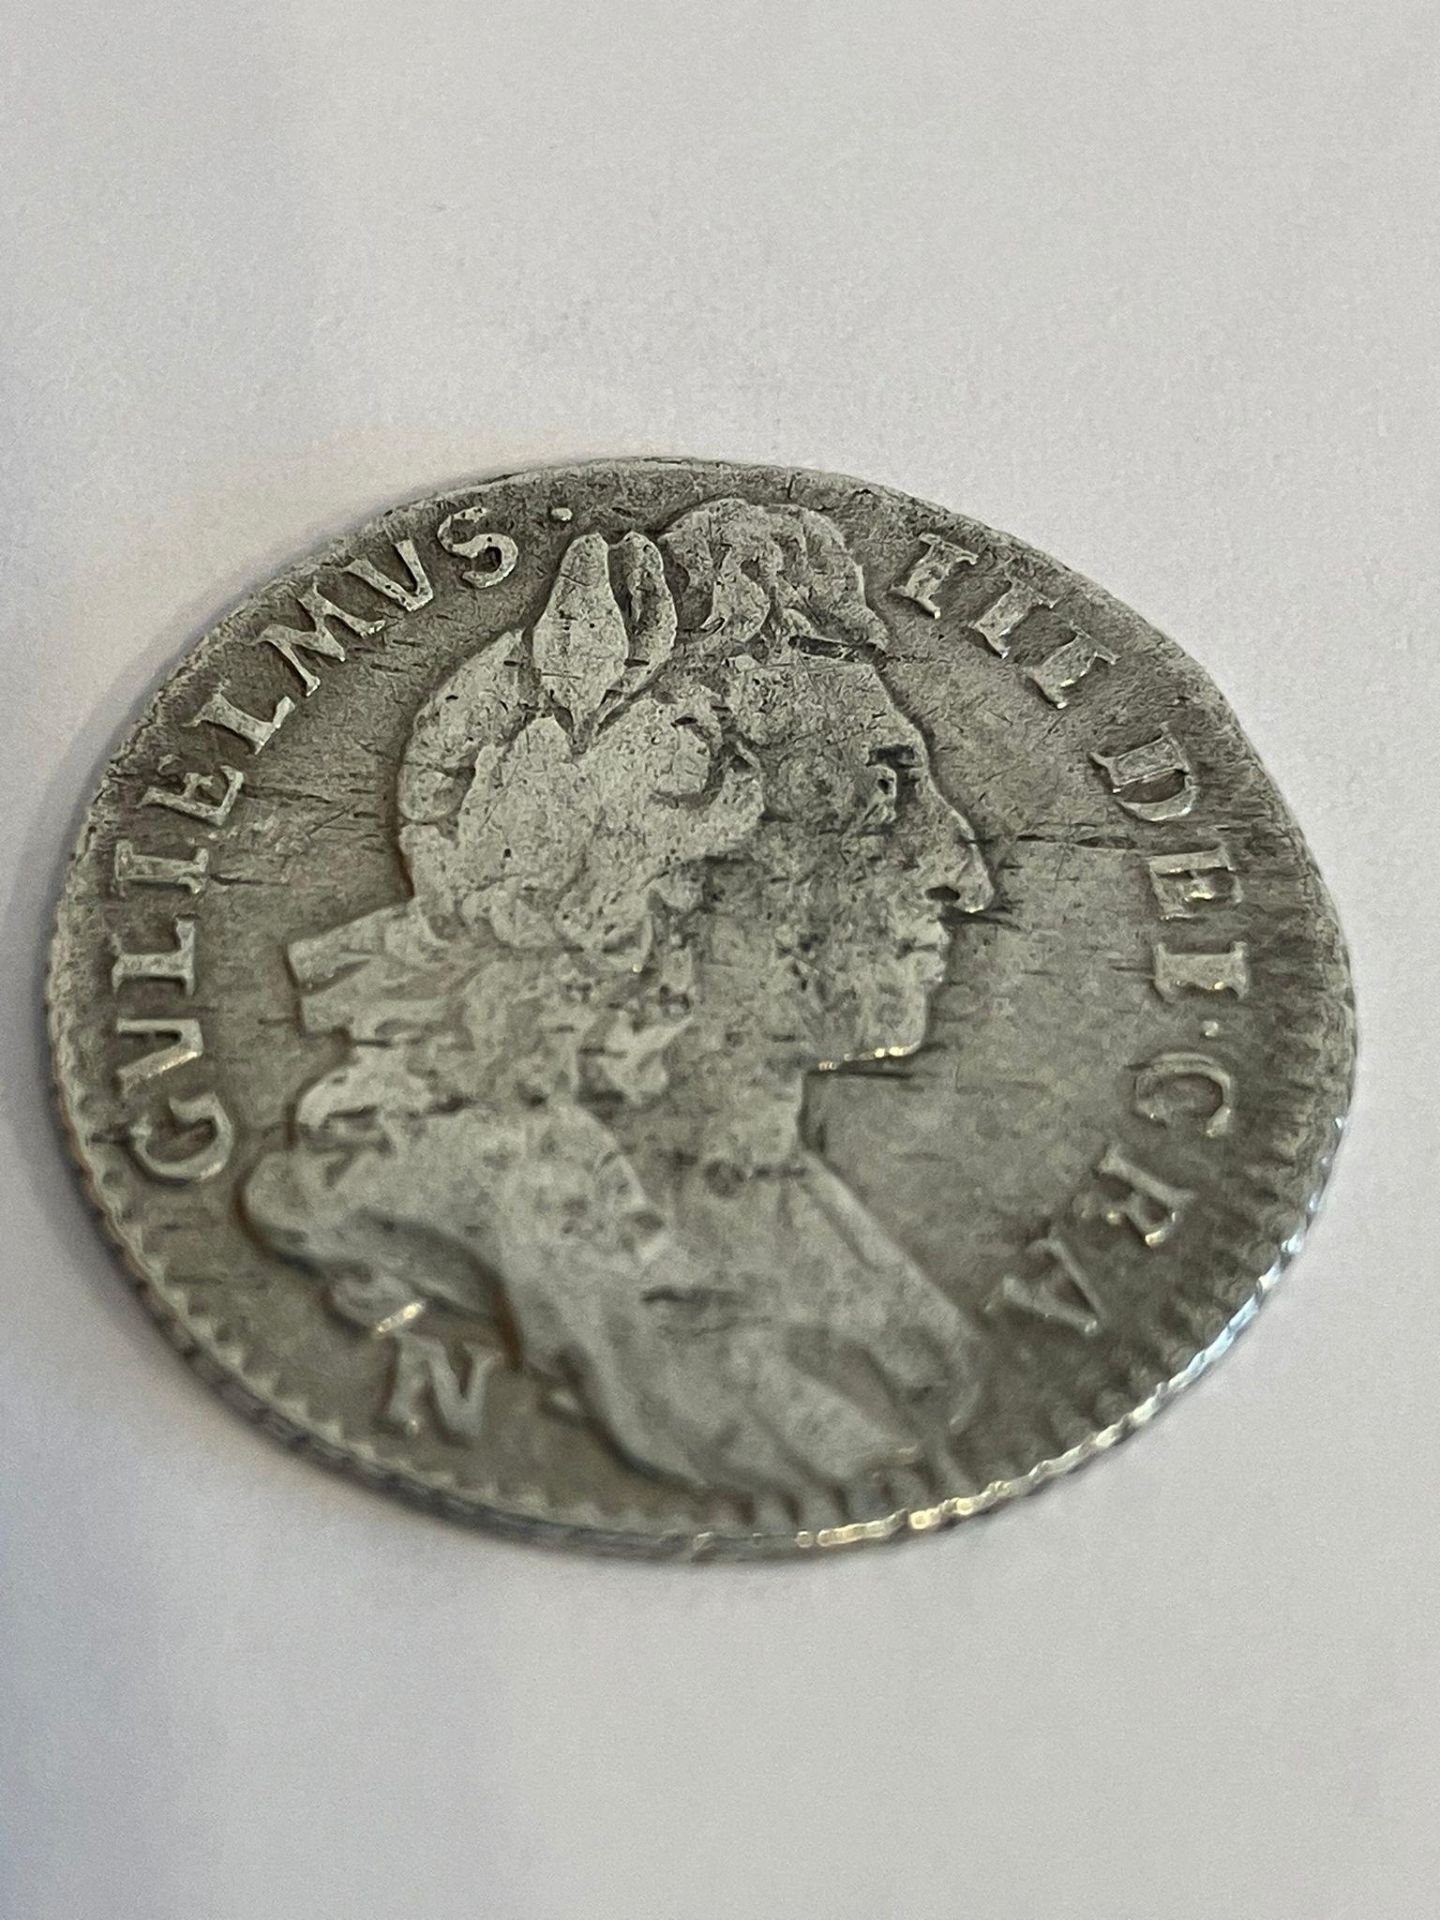 1697 WILLIAM III (William of Orange) SILVER SIXPENCE. Very fine/ extra fine condition. Please see - Image 2 of 2